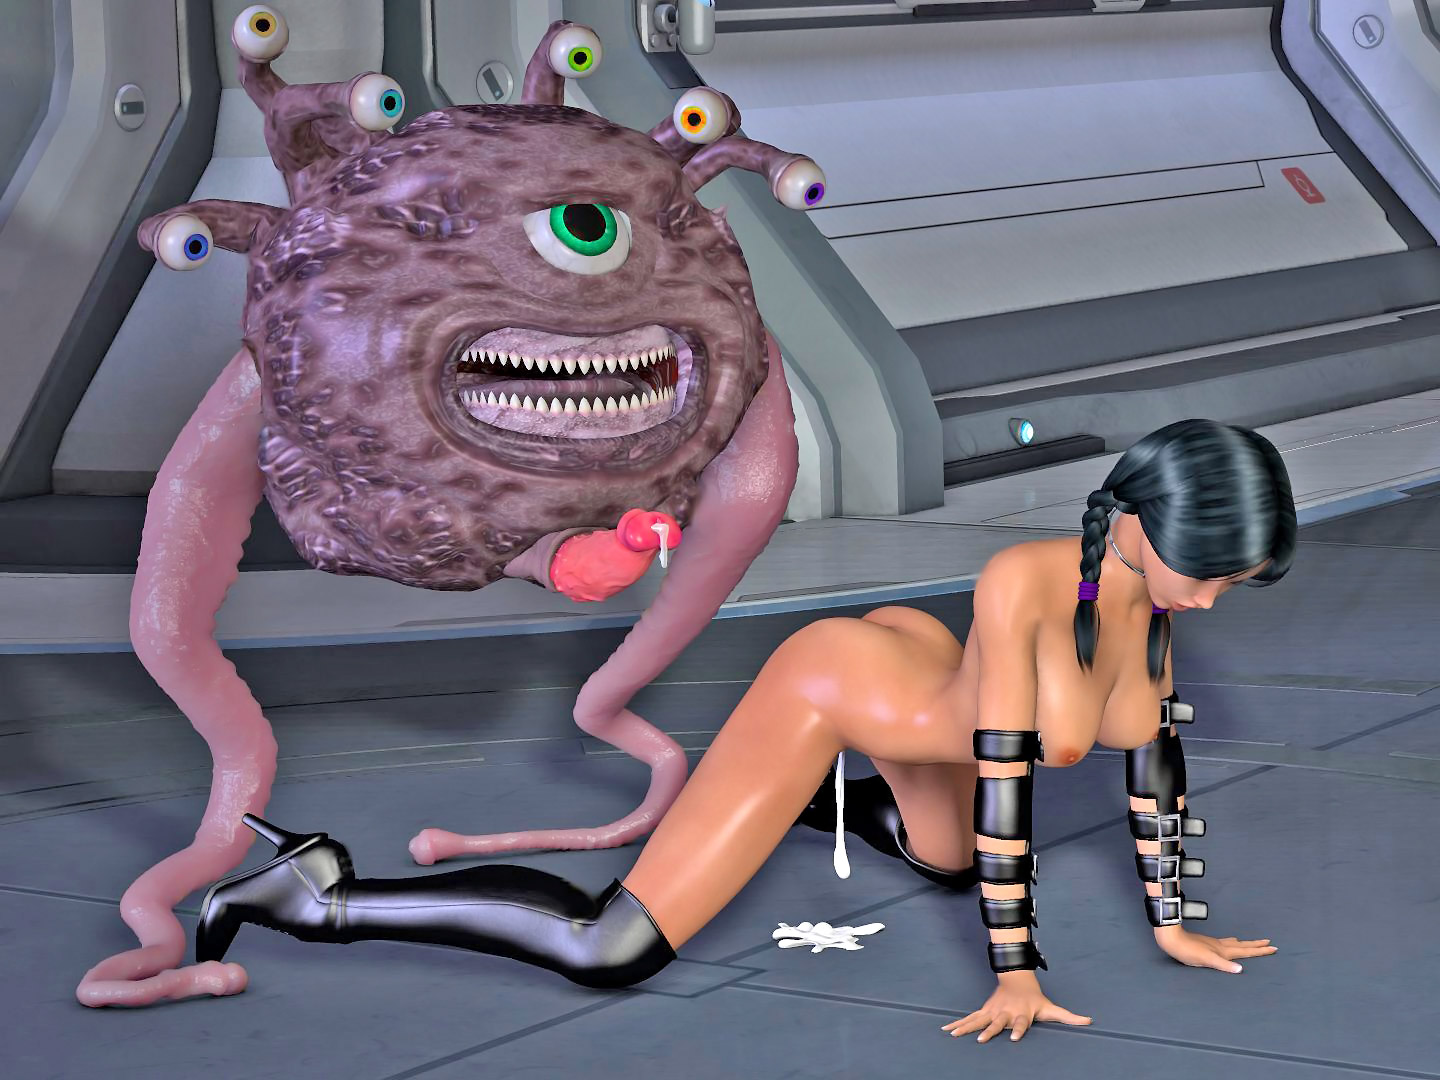 Alien Creampie Porn - Horny alien gives a sexy babe a double creampie at 3dEvilMonsters